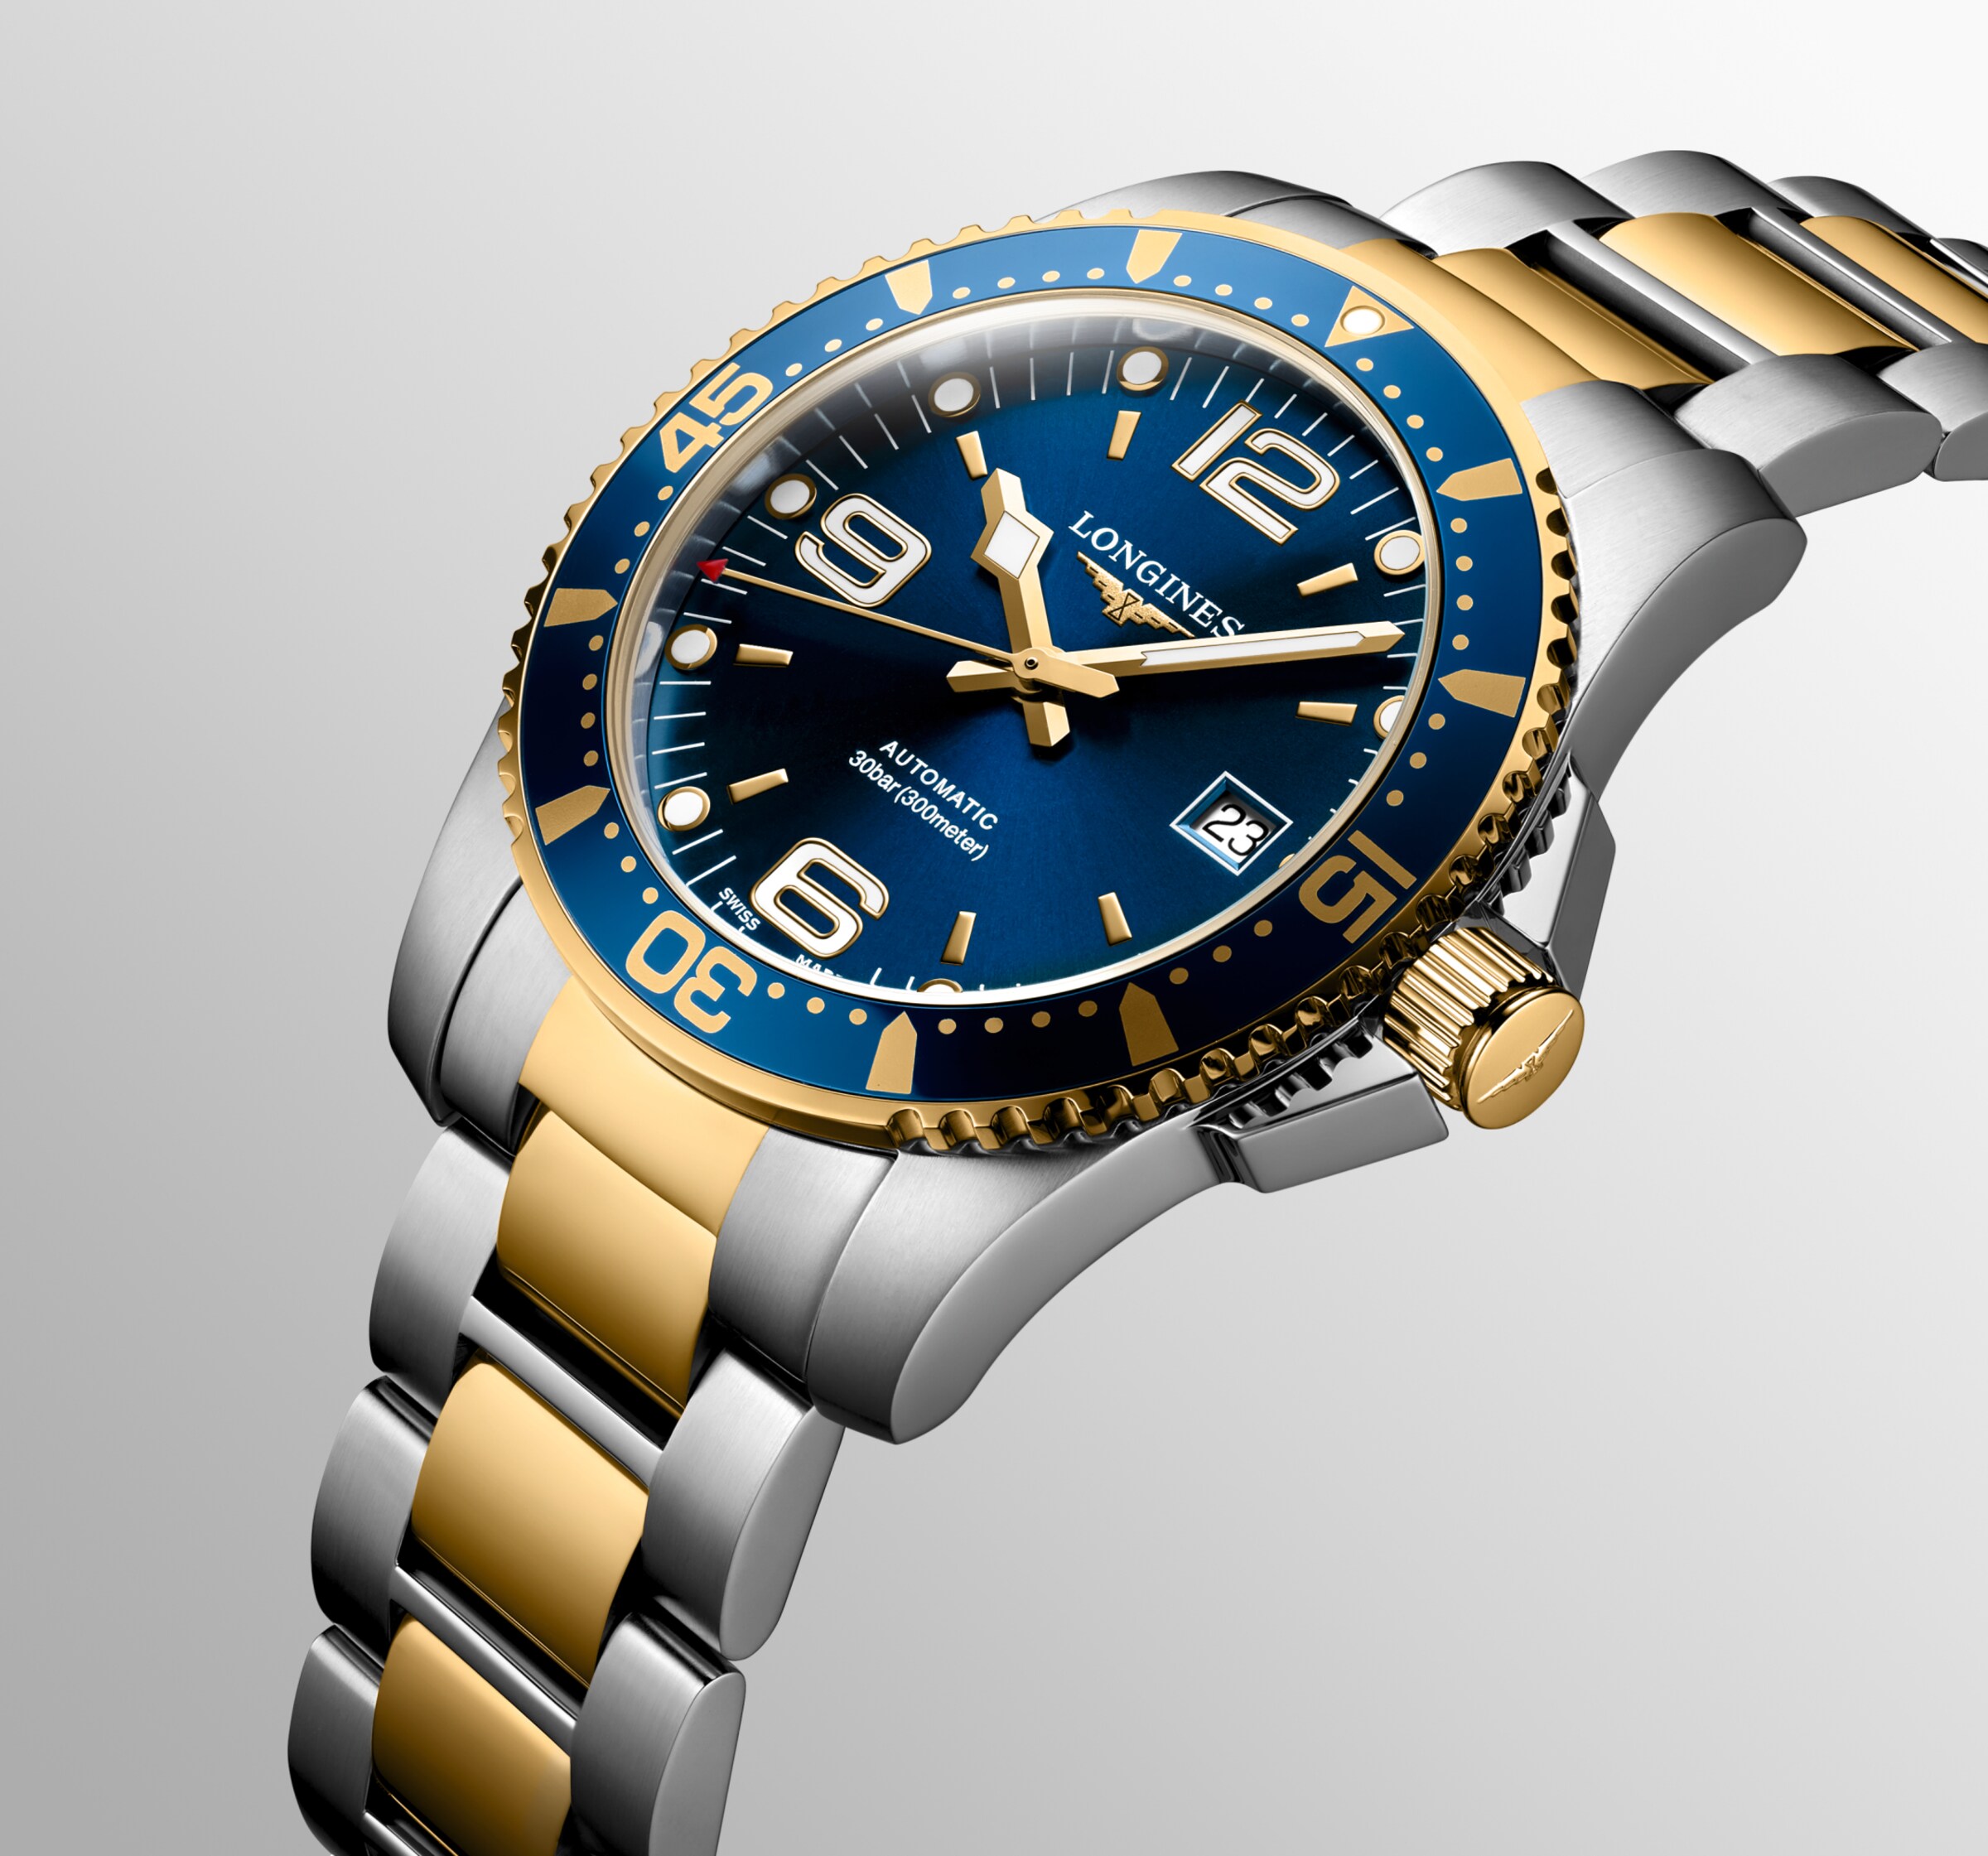 Longines HYDROCONQUEST Automatic Stainless steel and yellow PVD coating Watch - L3.742.3.96.7